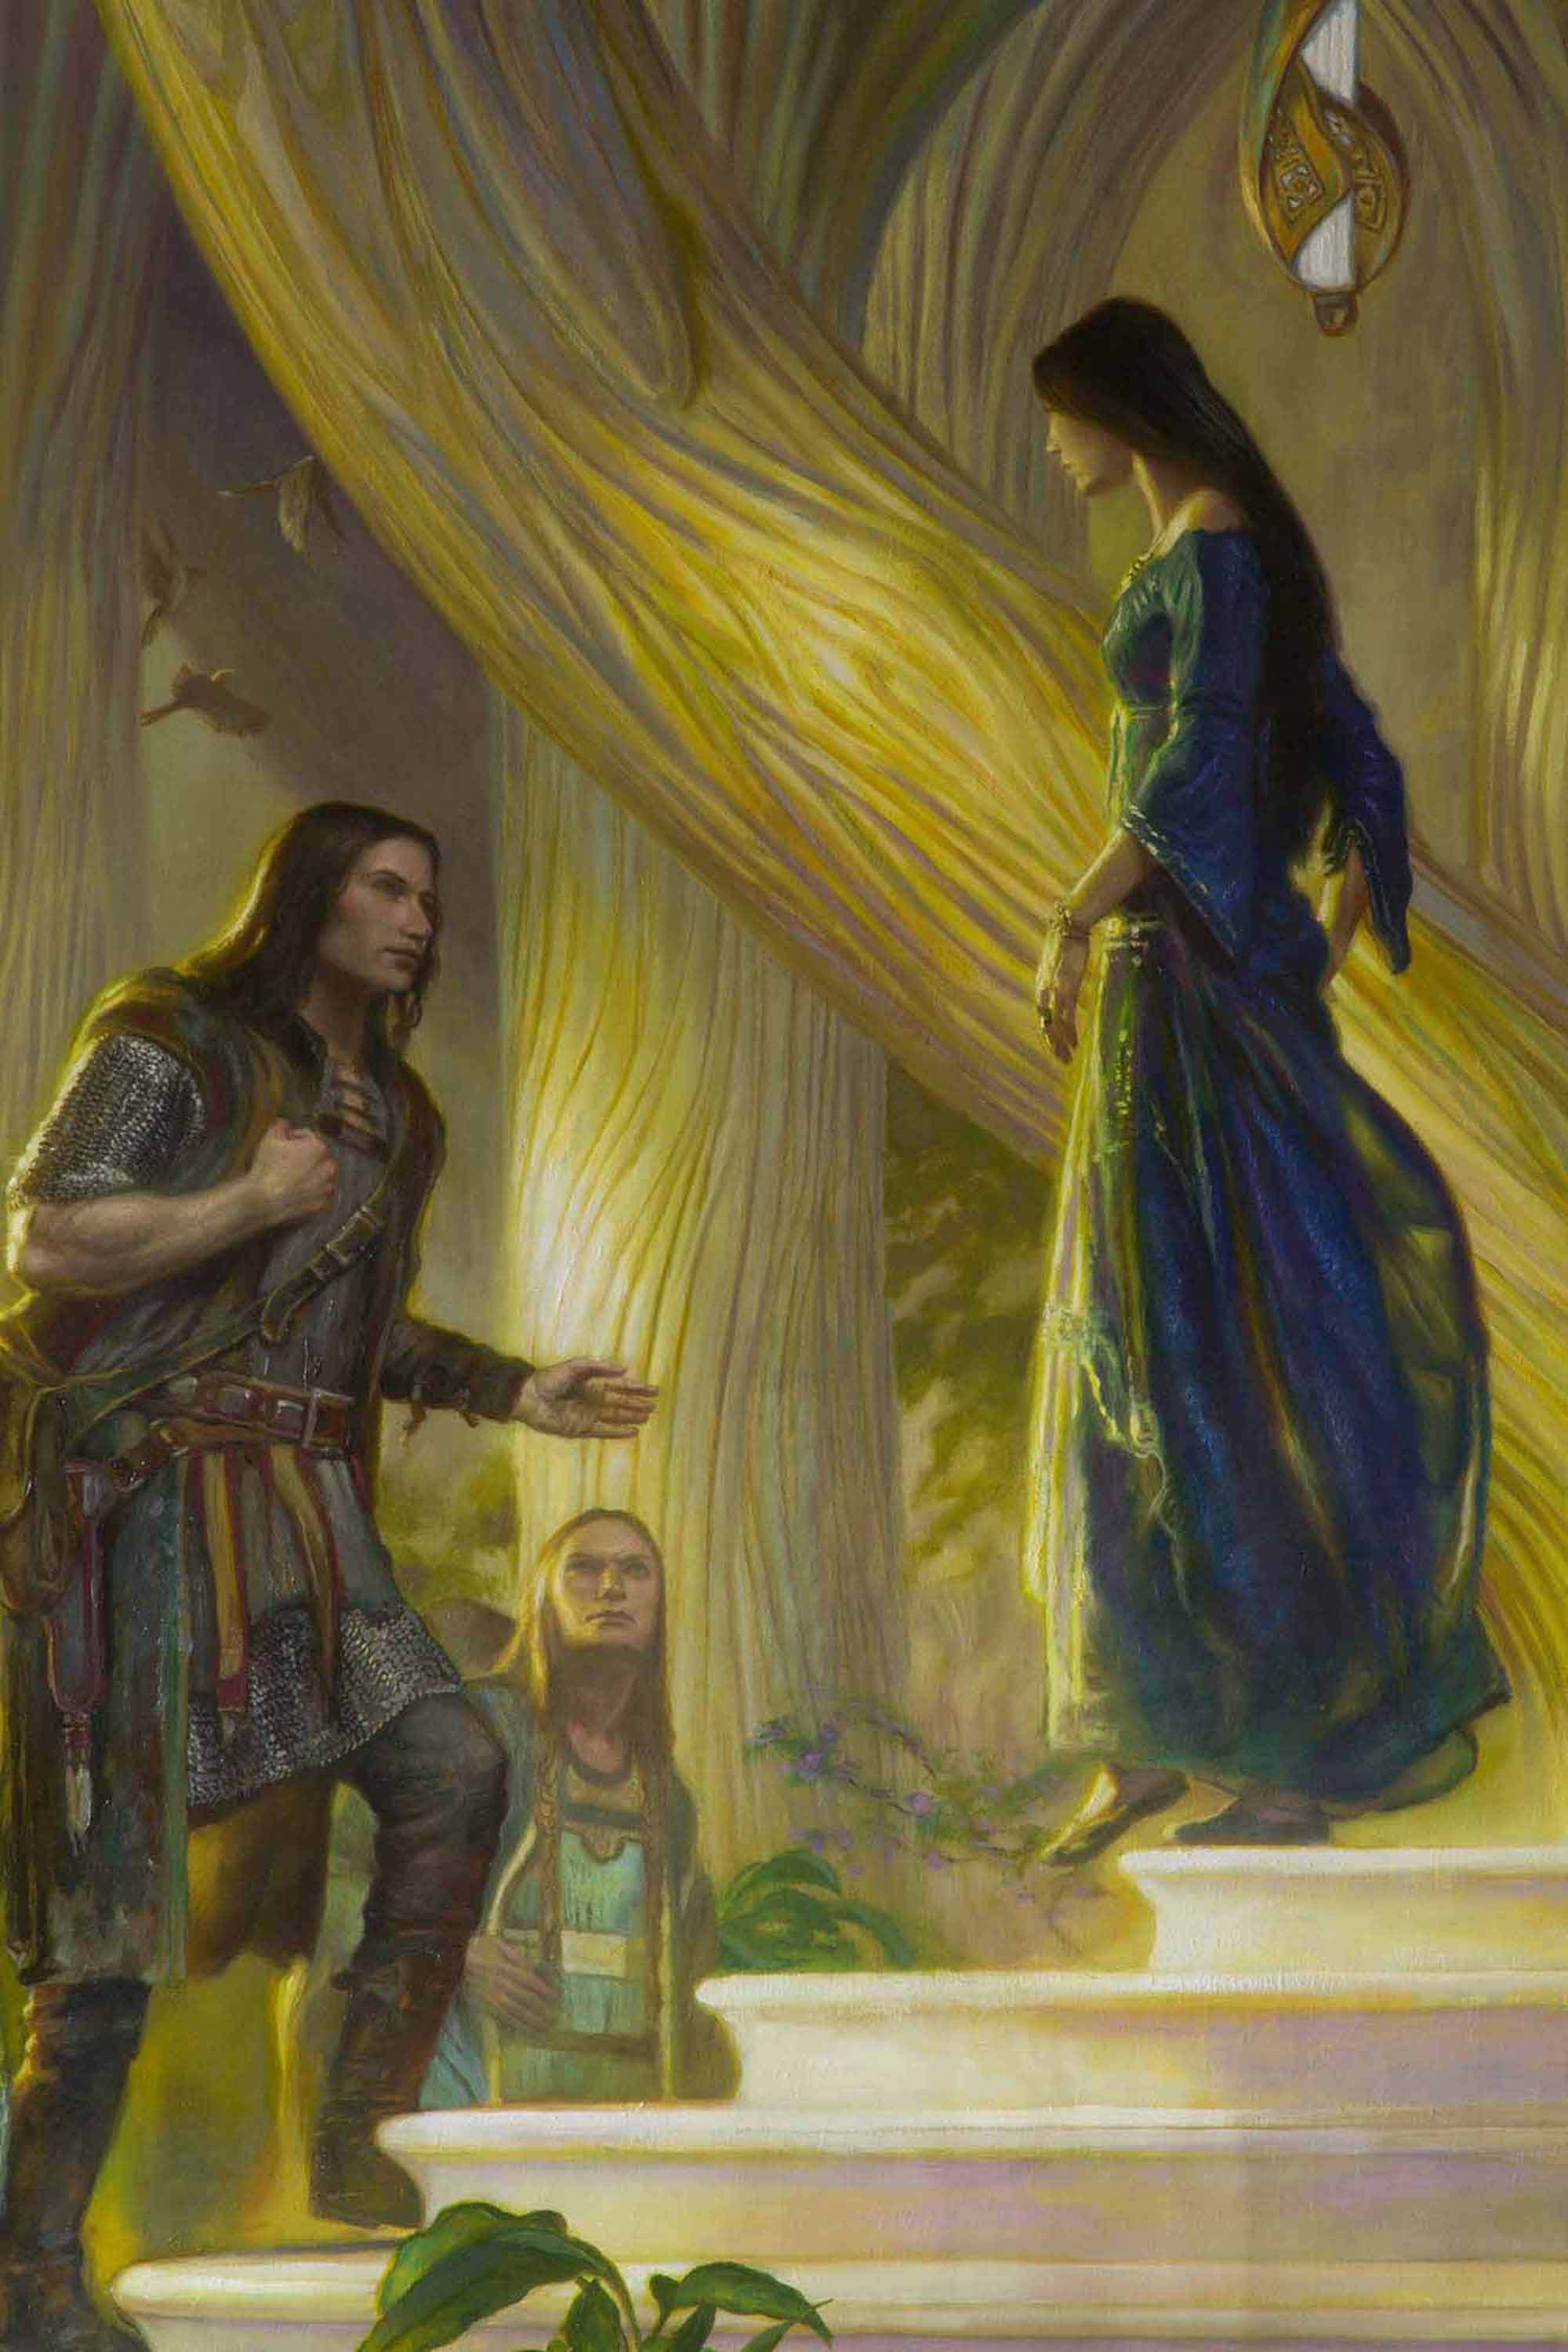 Beren and Luthien in the Court of Thingol and Melian
60" x 110"  Oil on Linen  2015
detail,  from J.R.R. Tolkien's The Silmarillion